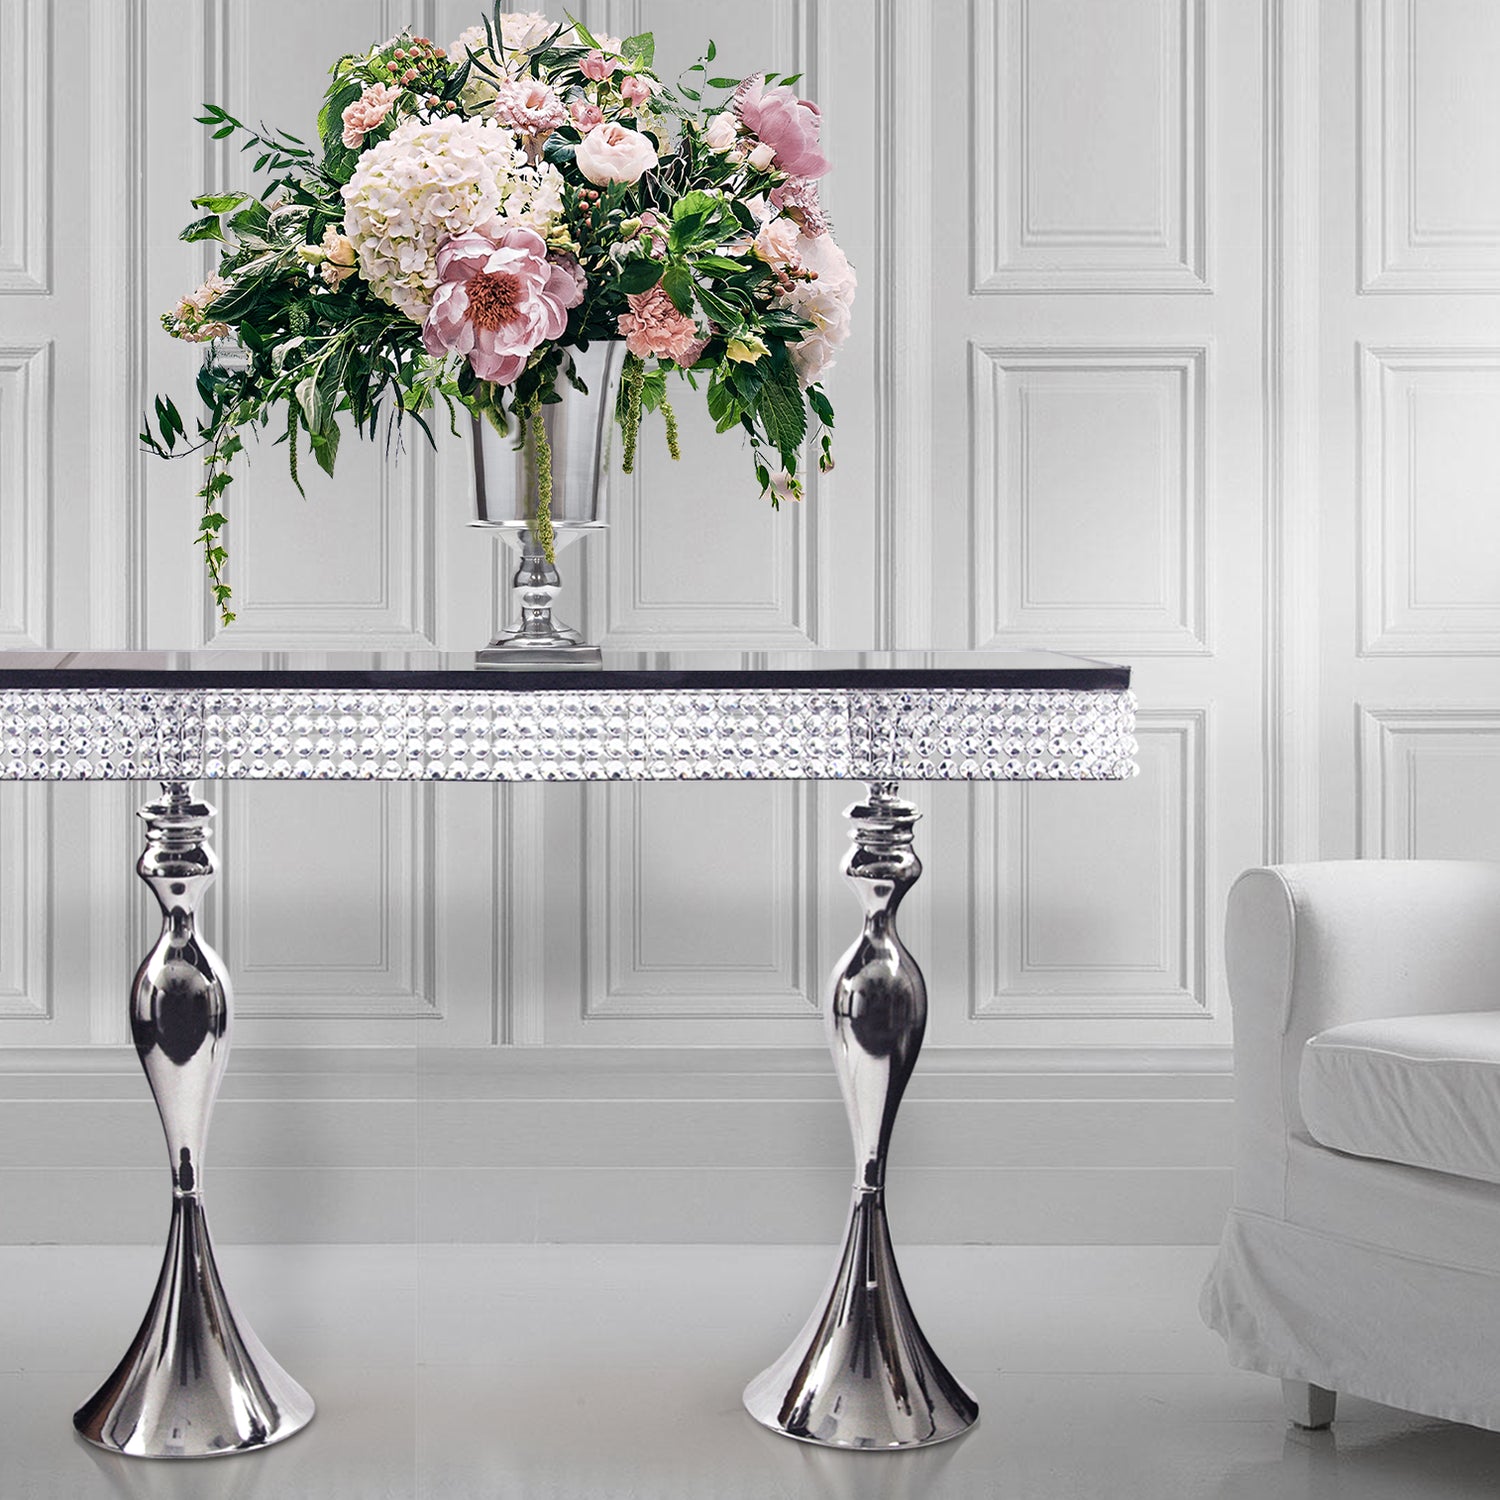 Crystal Console Table | Galore Home: Luxury Home Decor, Elegant Home Furnishings, Stylish Home Accents & Contemporary Home Accessories